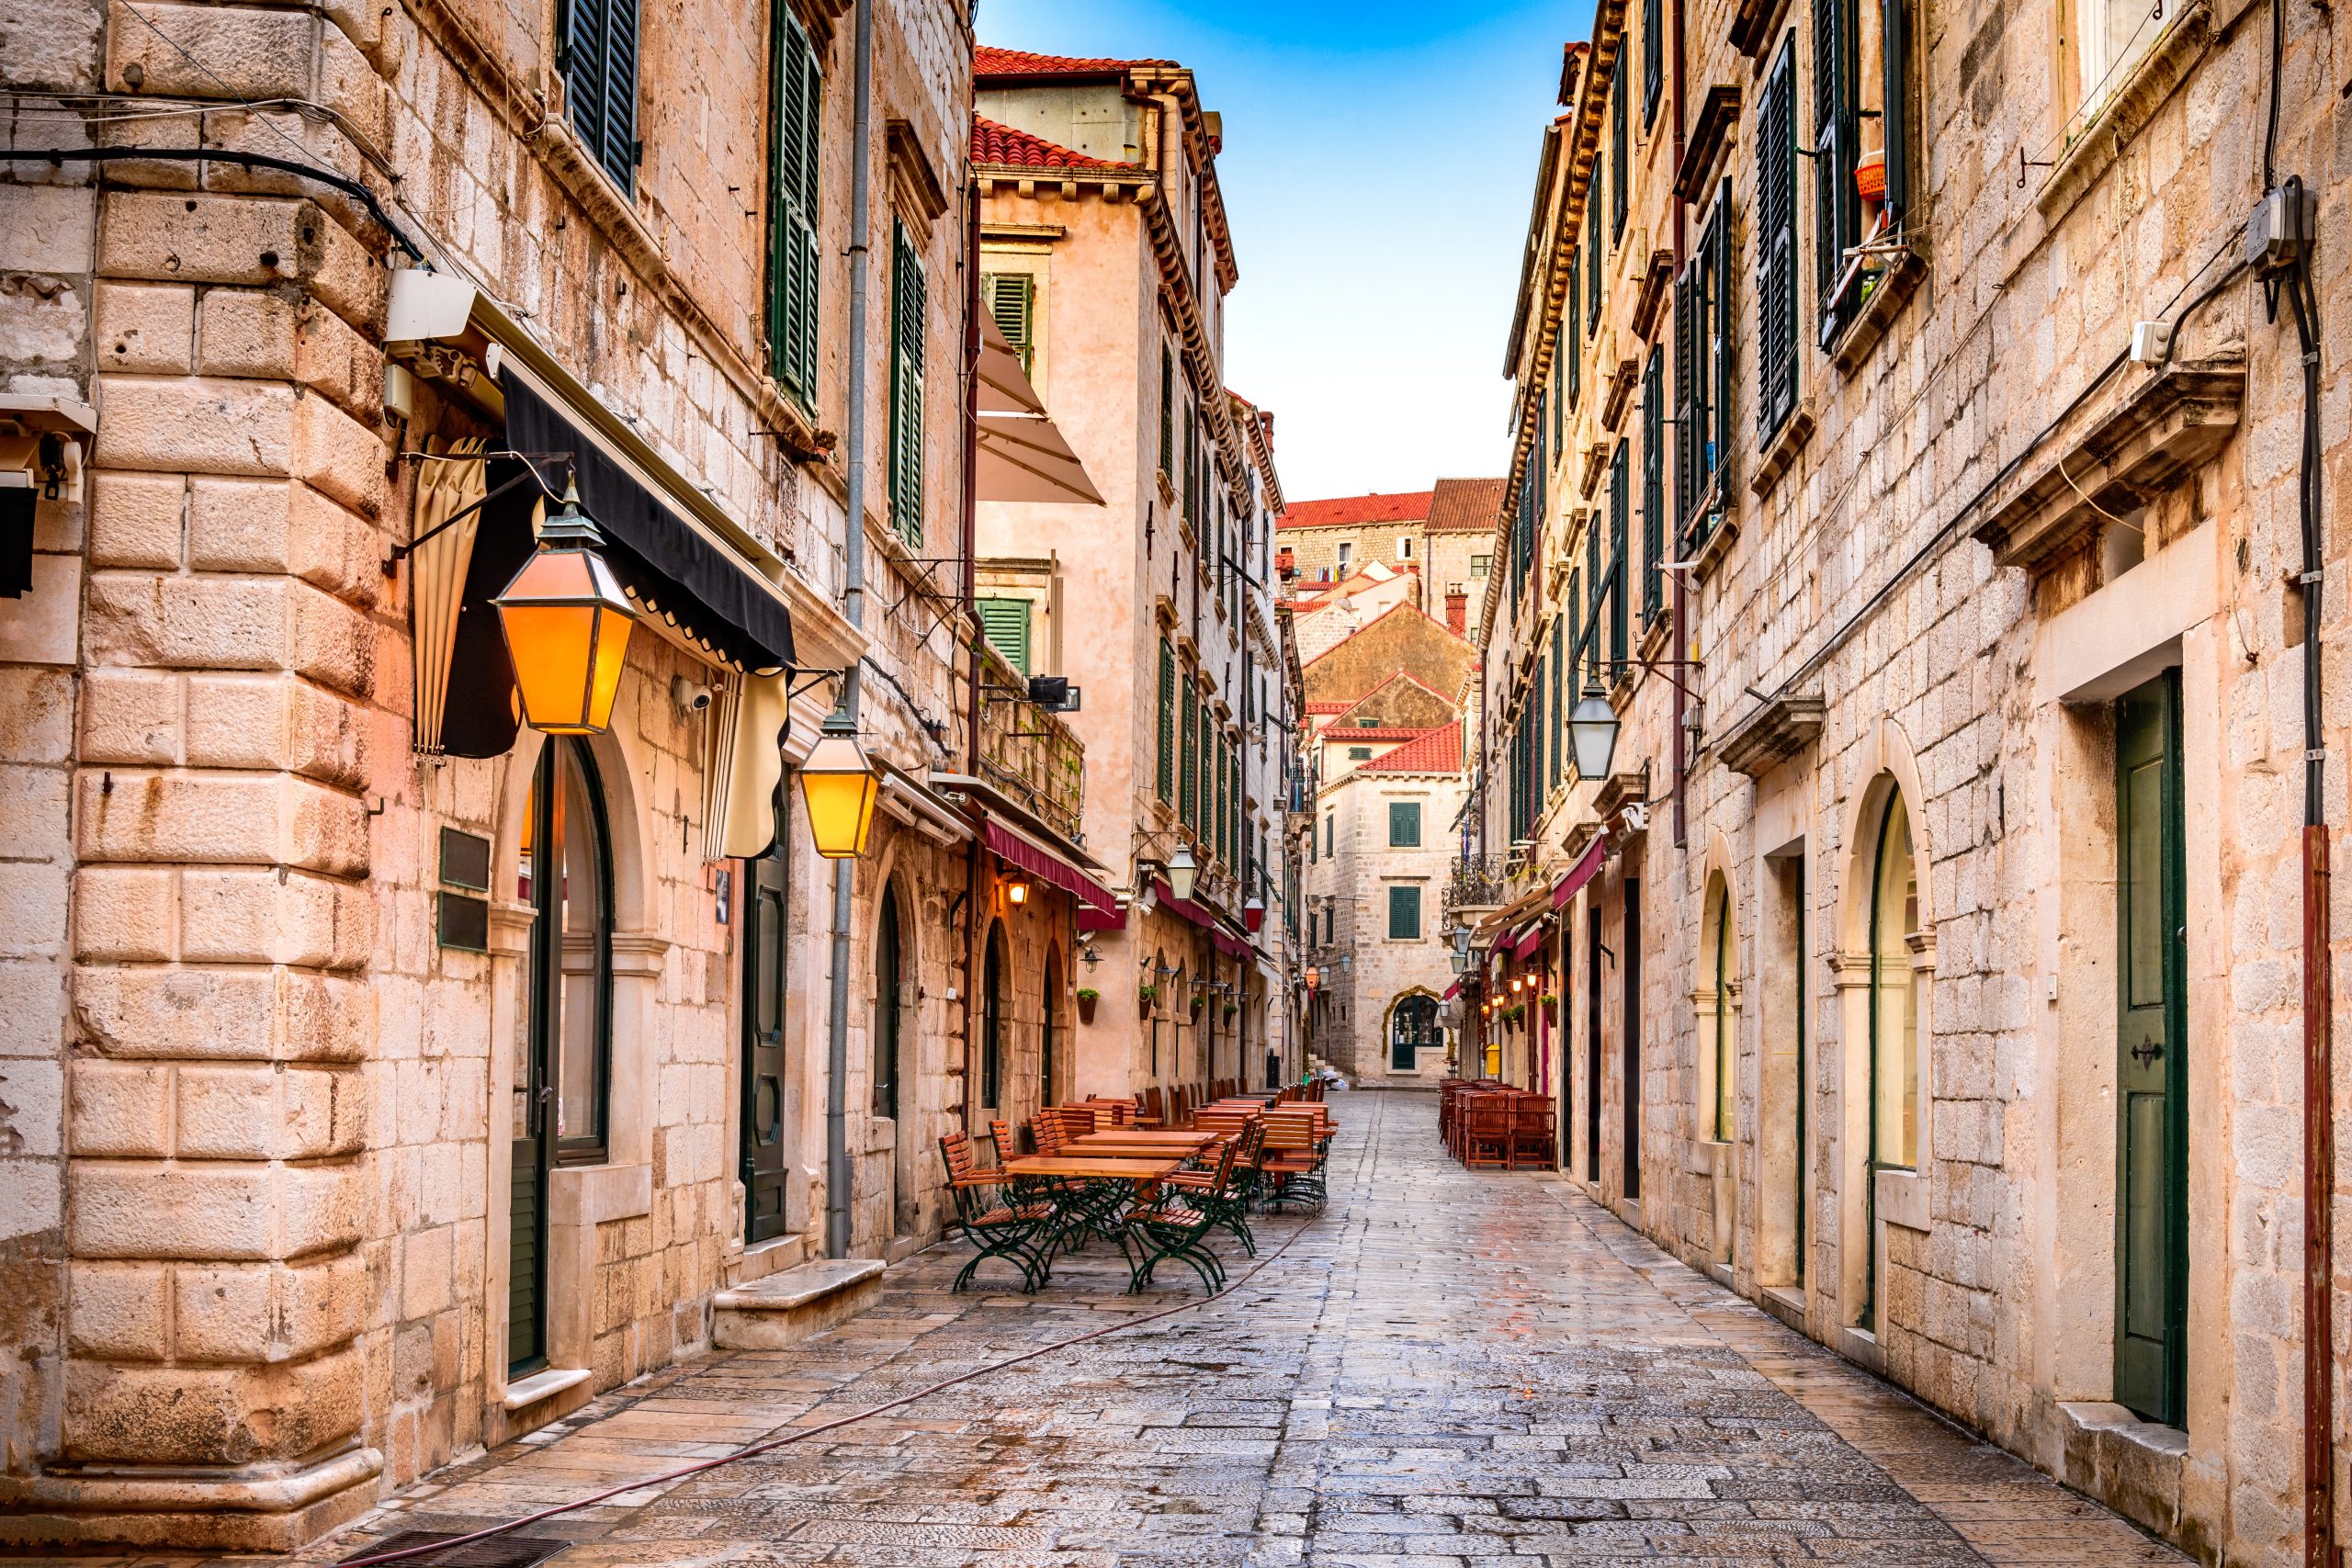 Stroll Through The Old City Of Dubrovnik On The Dubrovnik Day Tour From Split